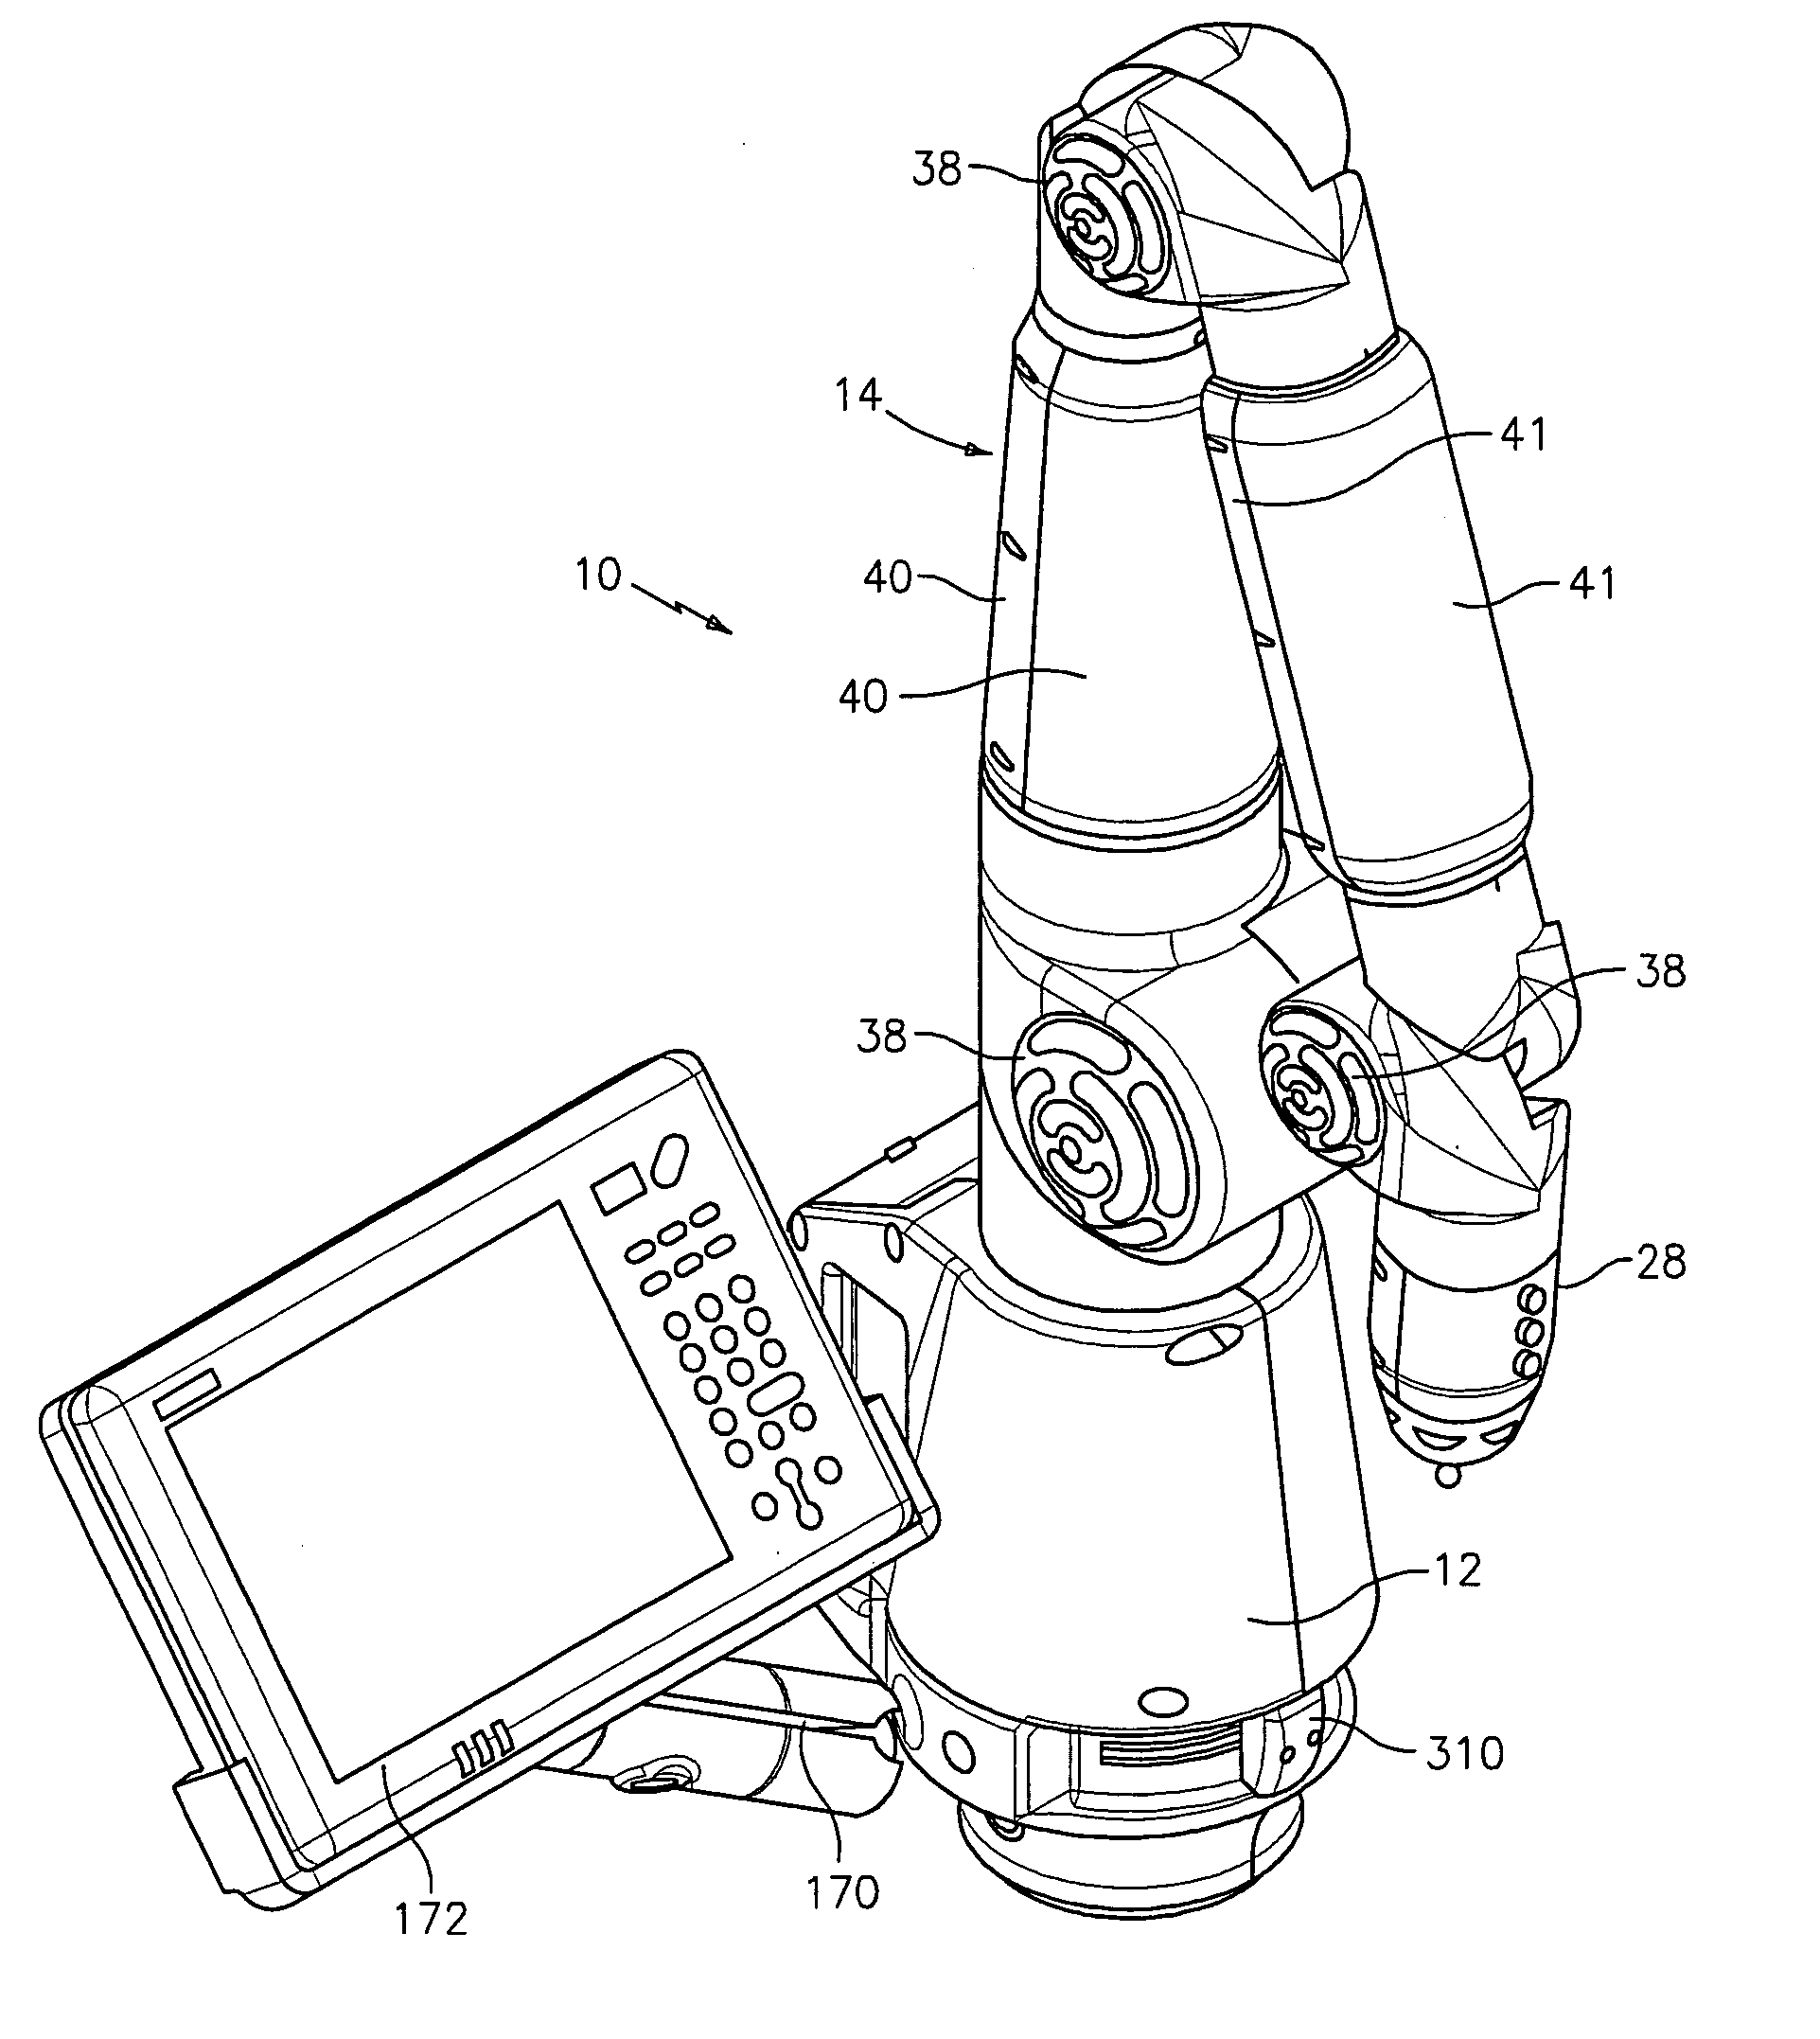 Method for improving measurement accuracy of a protable coordinate measurement machine